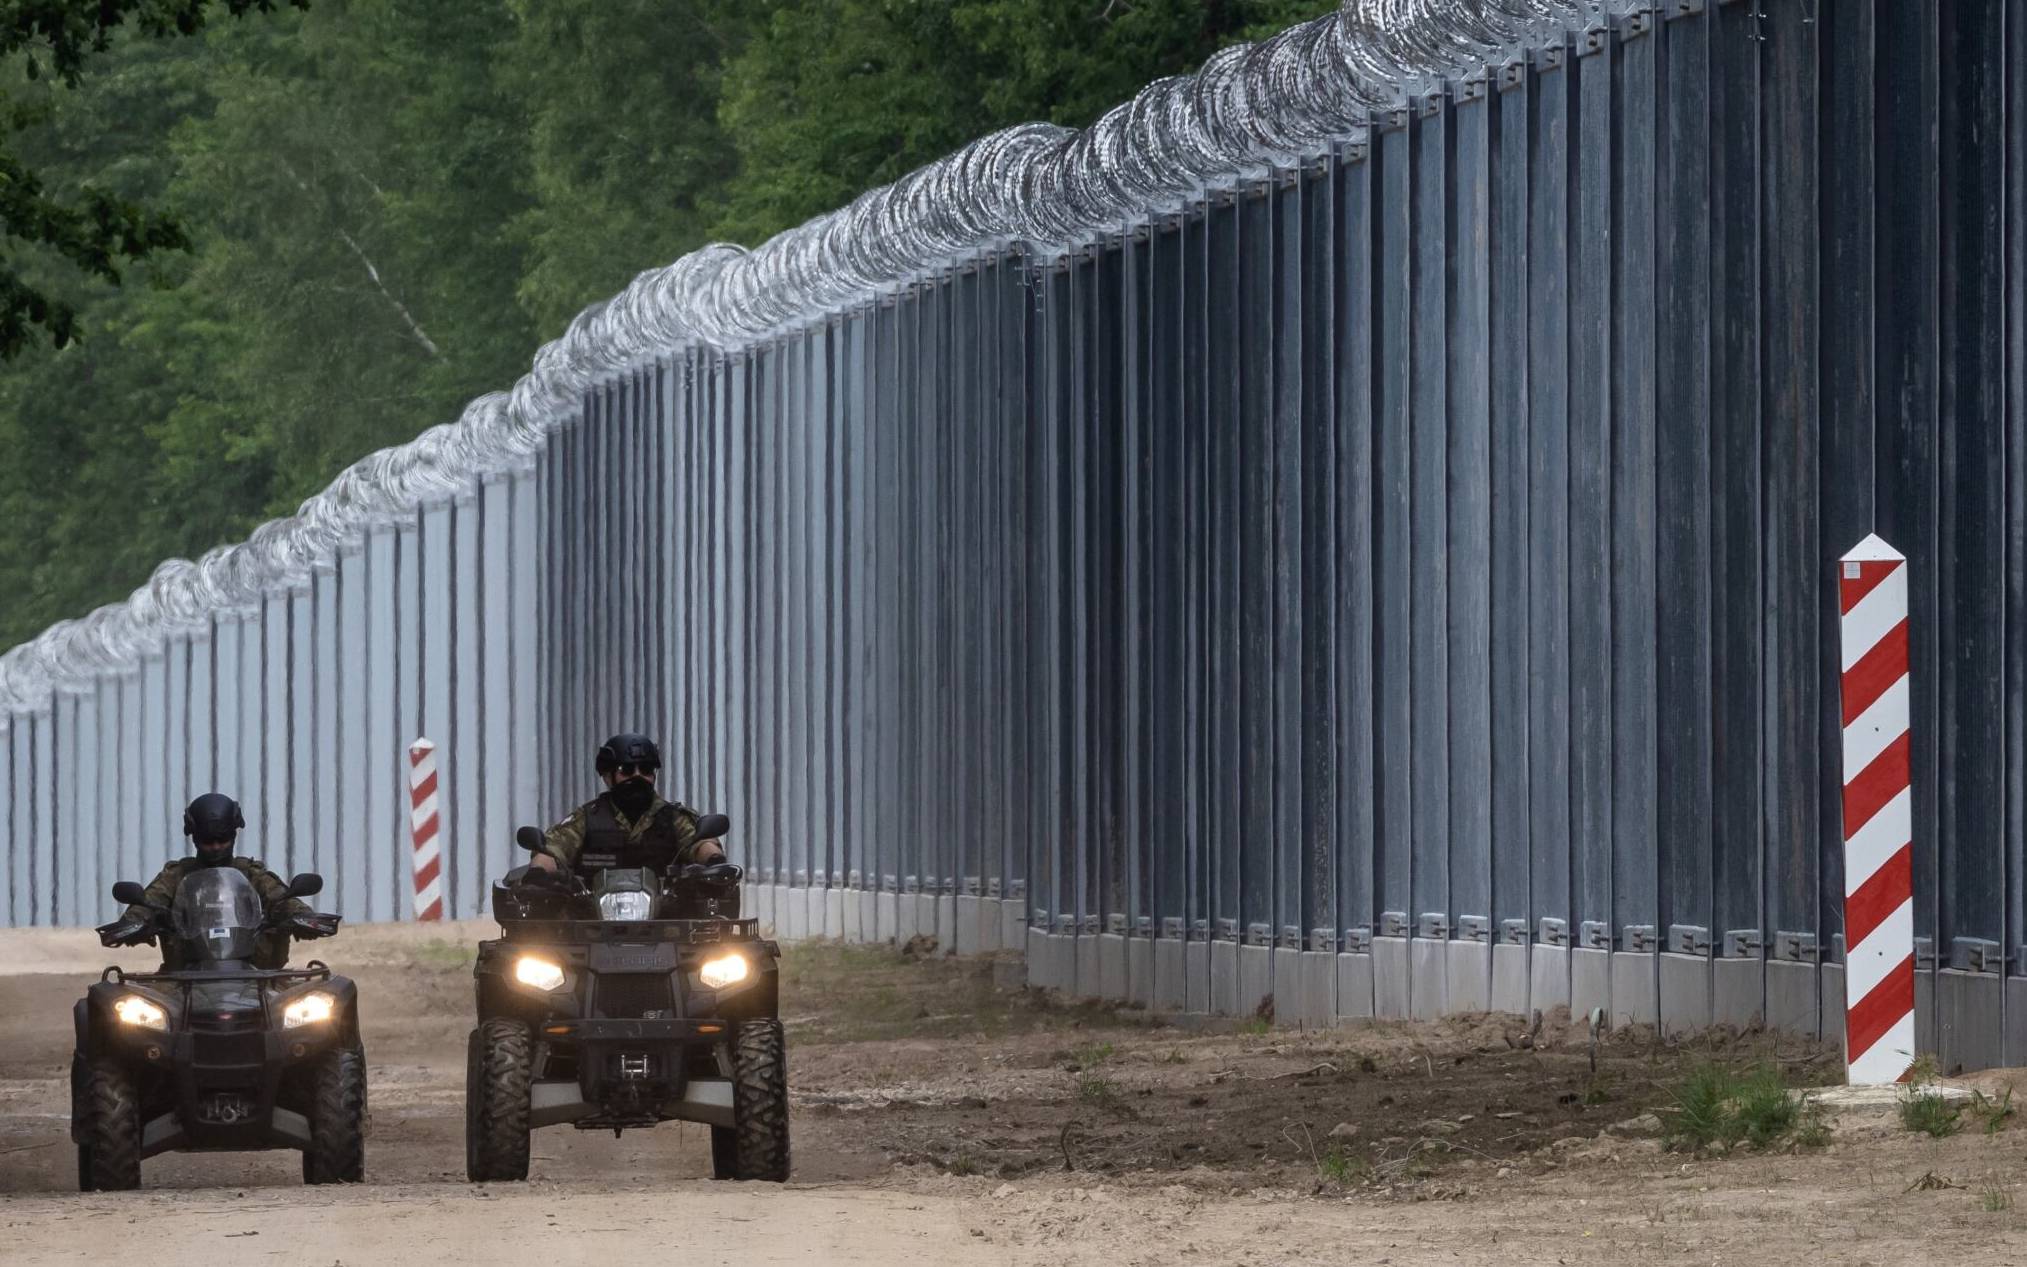 (FILES) In this file photo taken on June 08, 2022 border guards patrol on quads along the border wall at the Polish-Belarusian border near Tolcze village, in Sokolka County, Podlaskie Voivodeship, in north-eastern Poland. - Poland said on June 30, 2022 it had finished building a steel wall along the Belarus border to deter migrants, after it blamed Minsk for allowing in an influx to "destabilise" the region. Tens of thousands of migrants and refugees, mostly from the Middle East, have crossed or attempted to cross into Poland from Belarus since last summer. (Photo by Wojtek RADWANSKI / AFP)